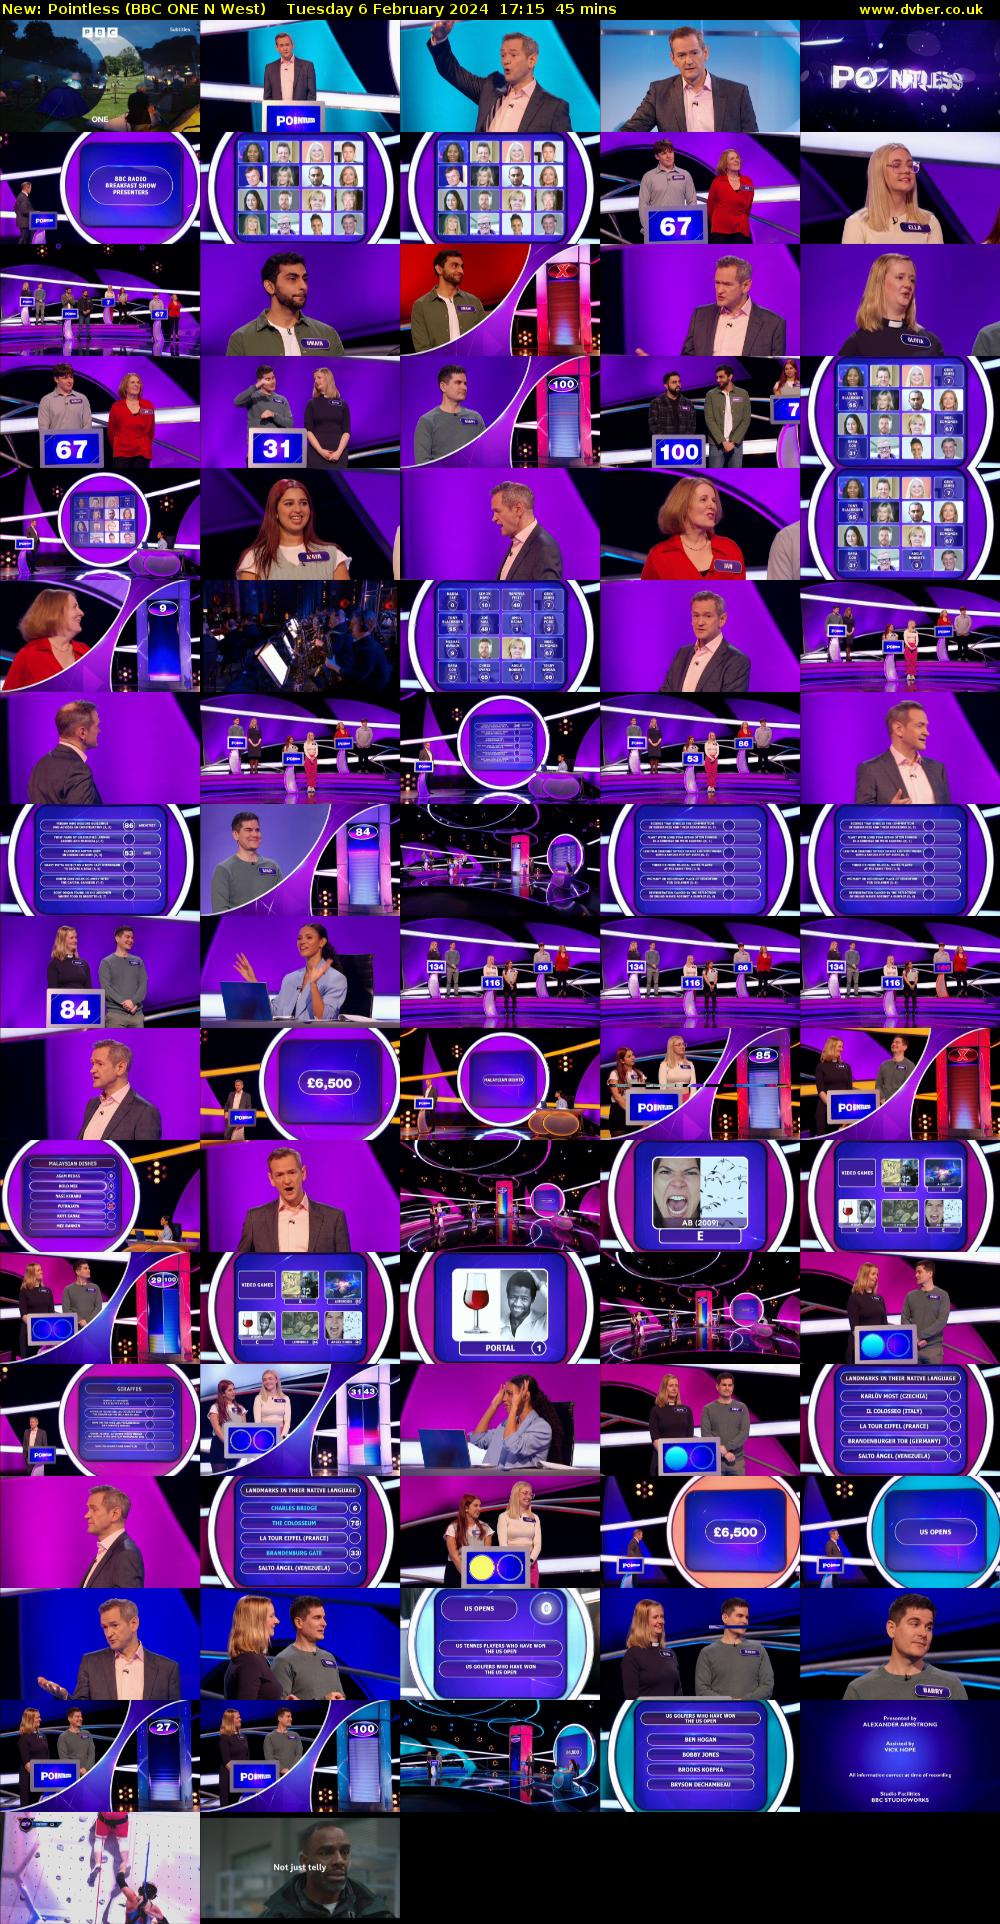 Pointless (BBC ONE N West) Tuesday 6 February 2024 17:15 - 18:00